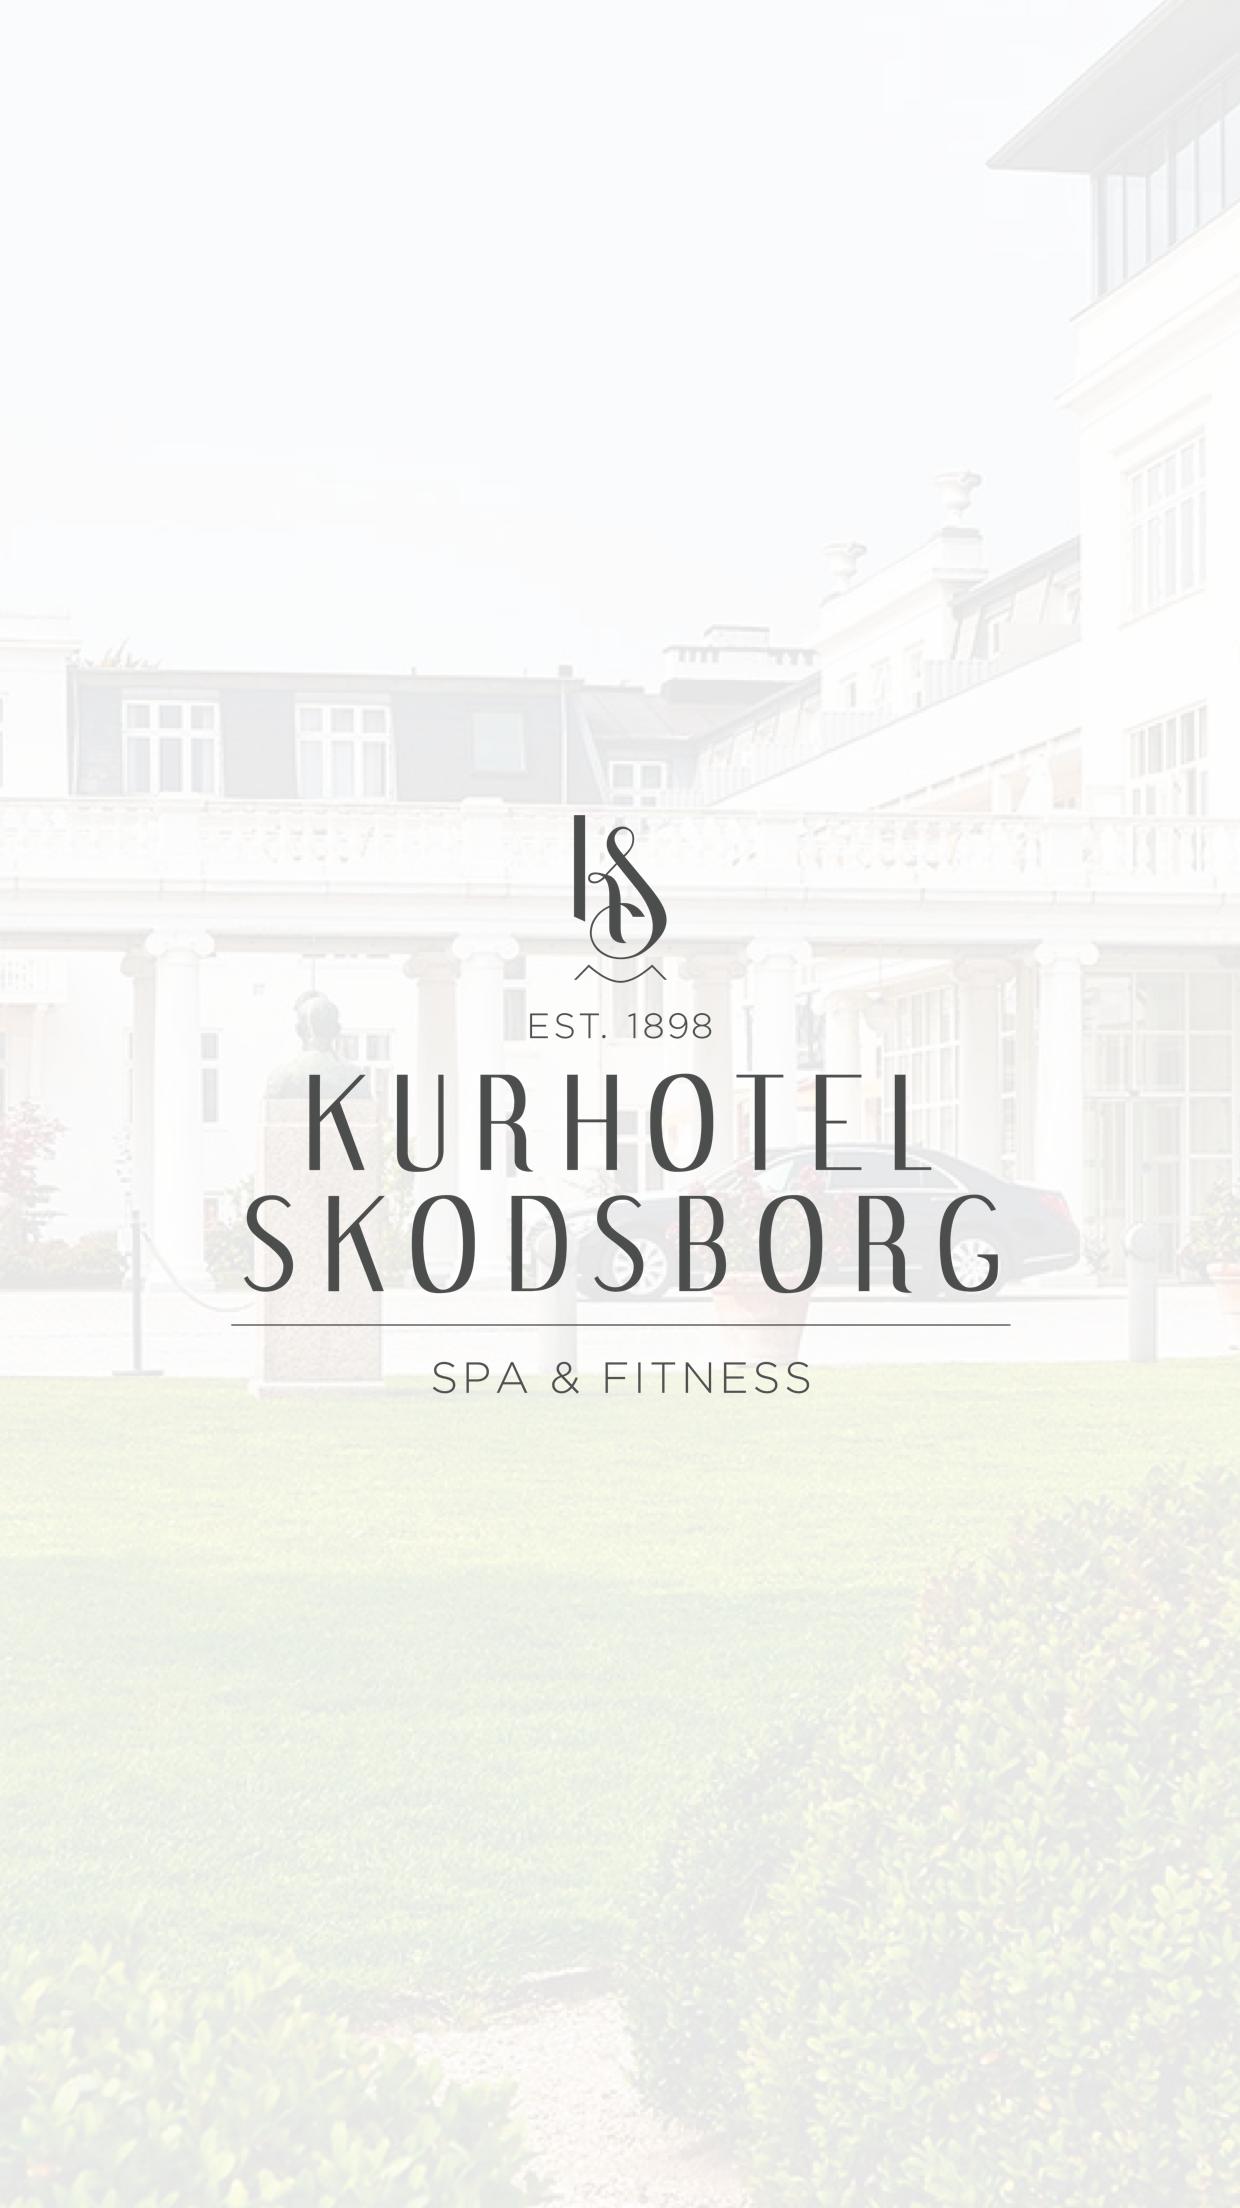 Skodsborg Spa & Fitness for Android - APK Download